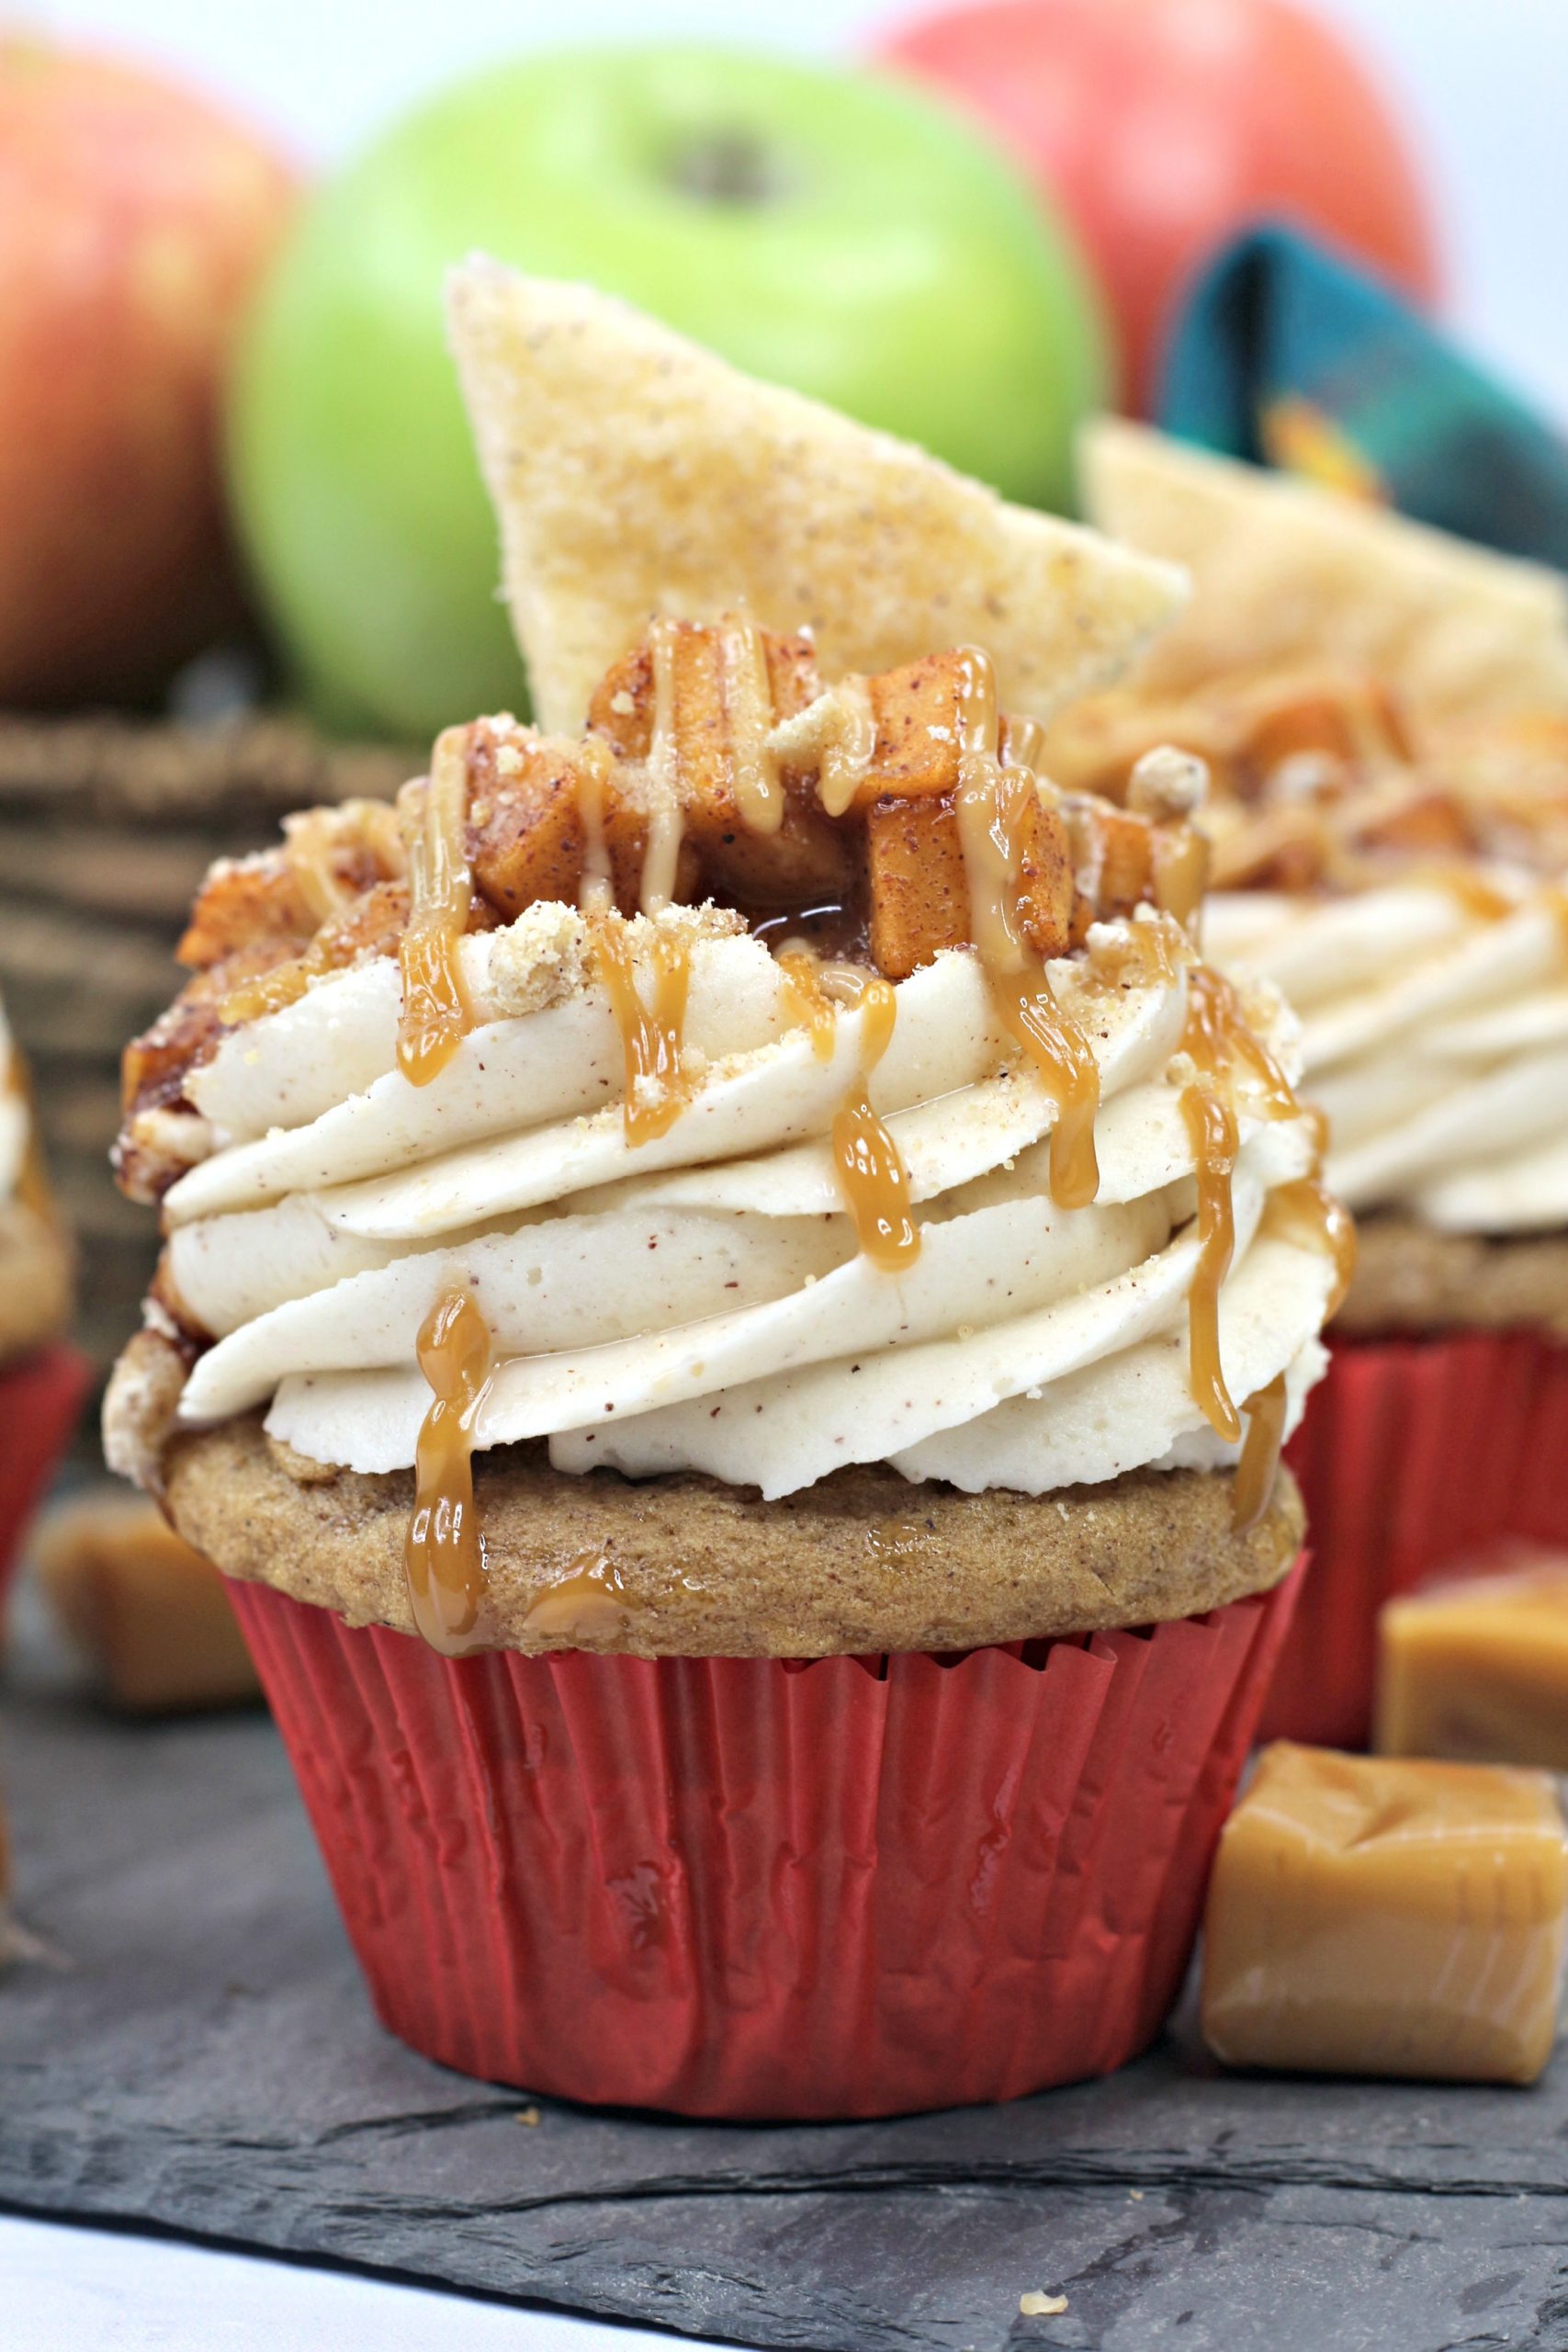 One of the Apple Pie Cupcakes with another behind it.